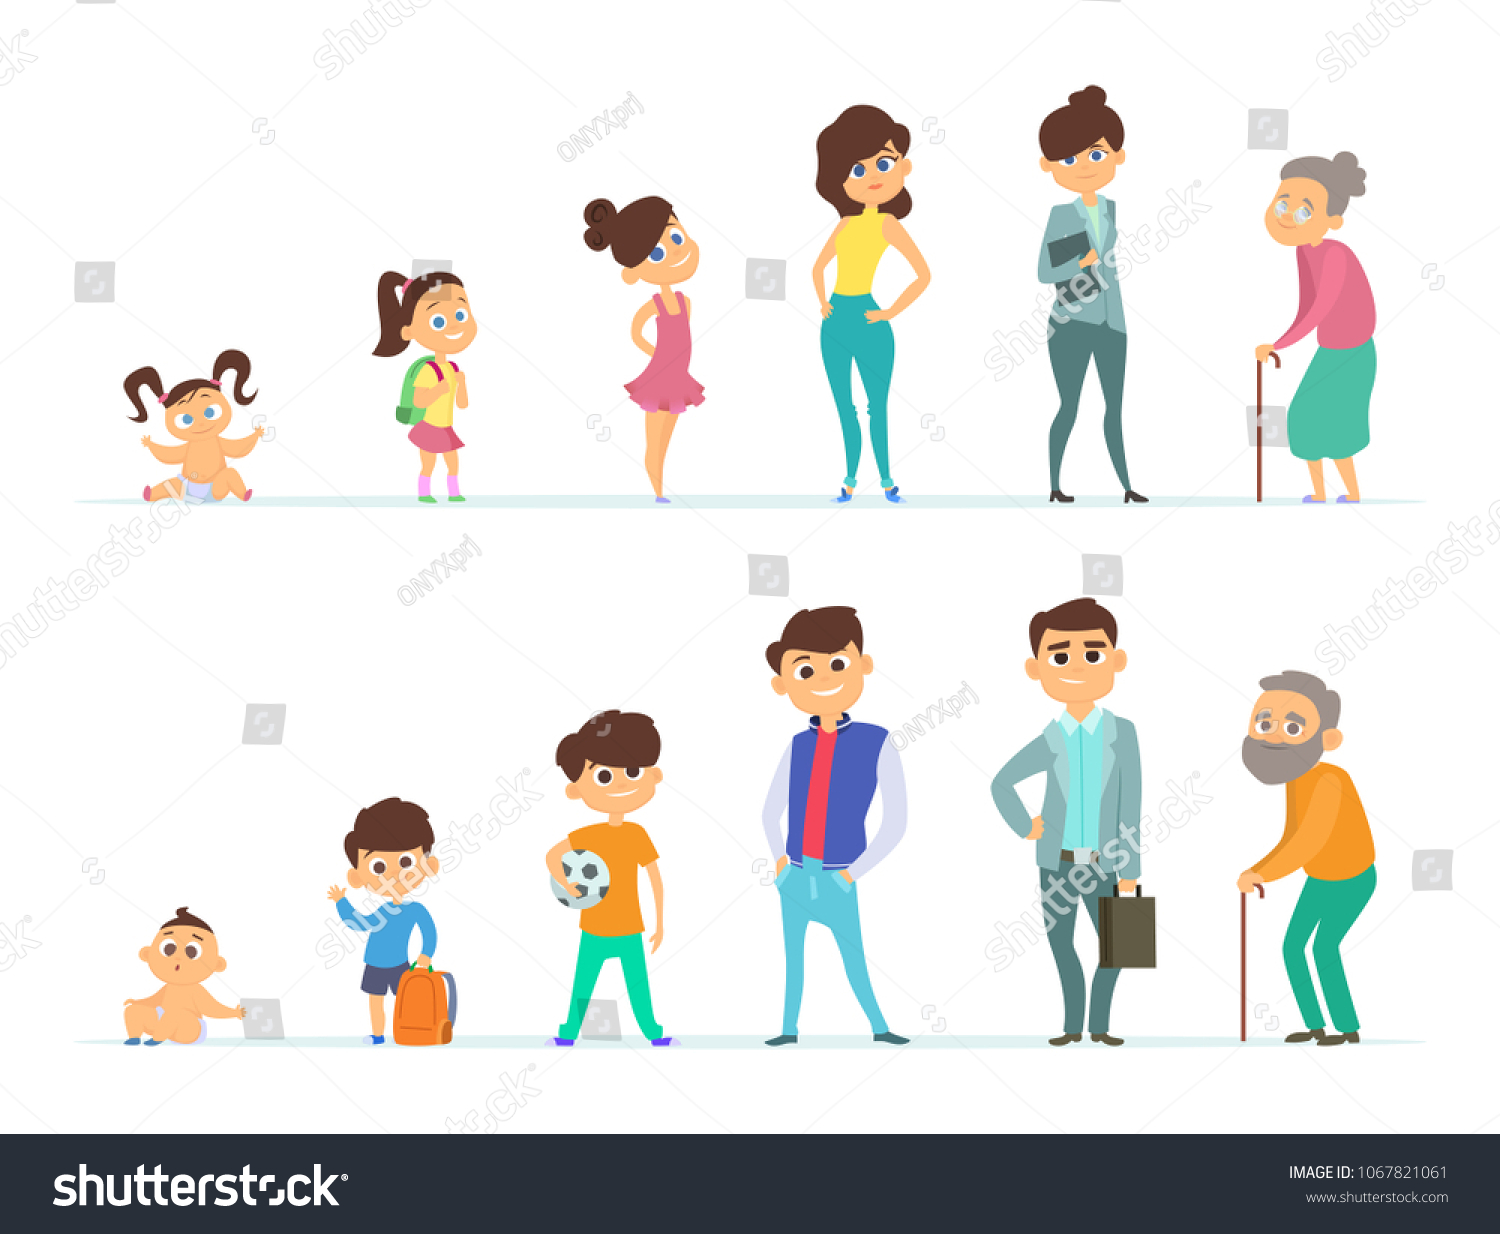 Life Cycle Male Female Different Characters Ilustrações Stock 1067821061 Shutterstock